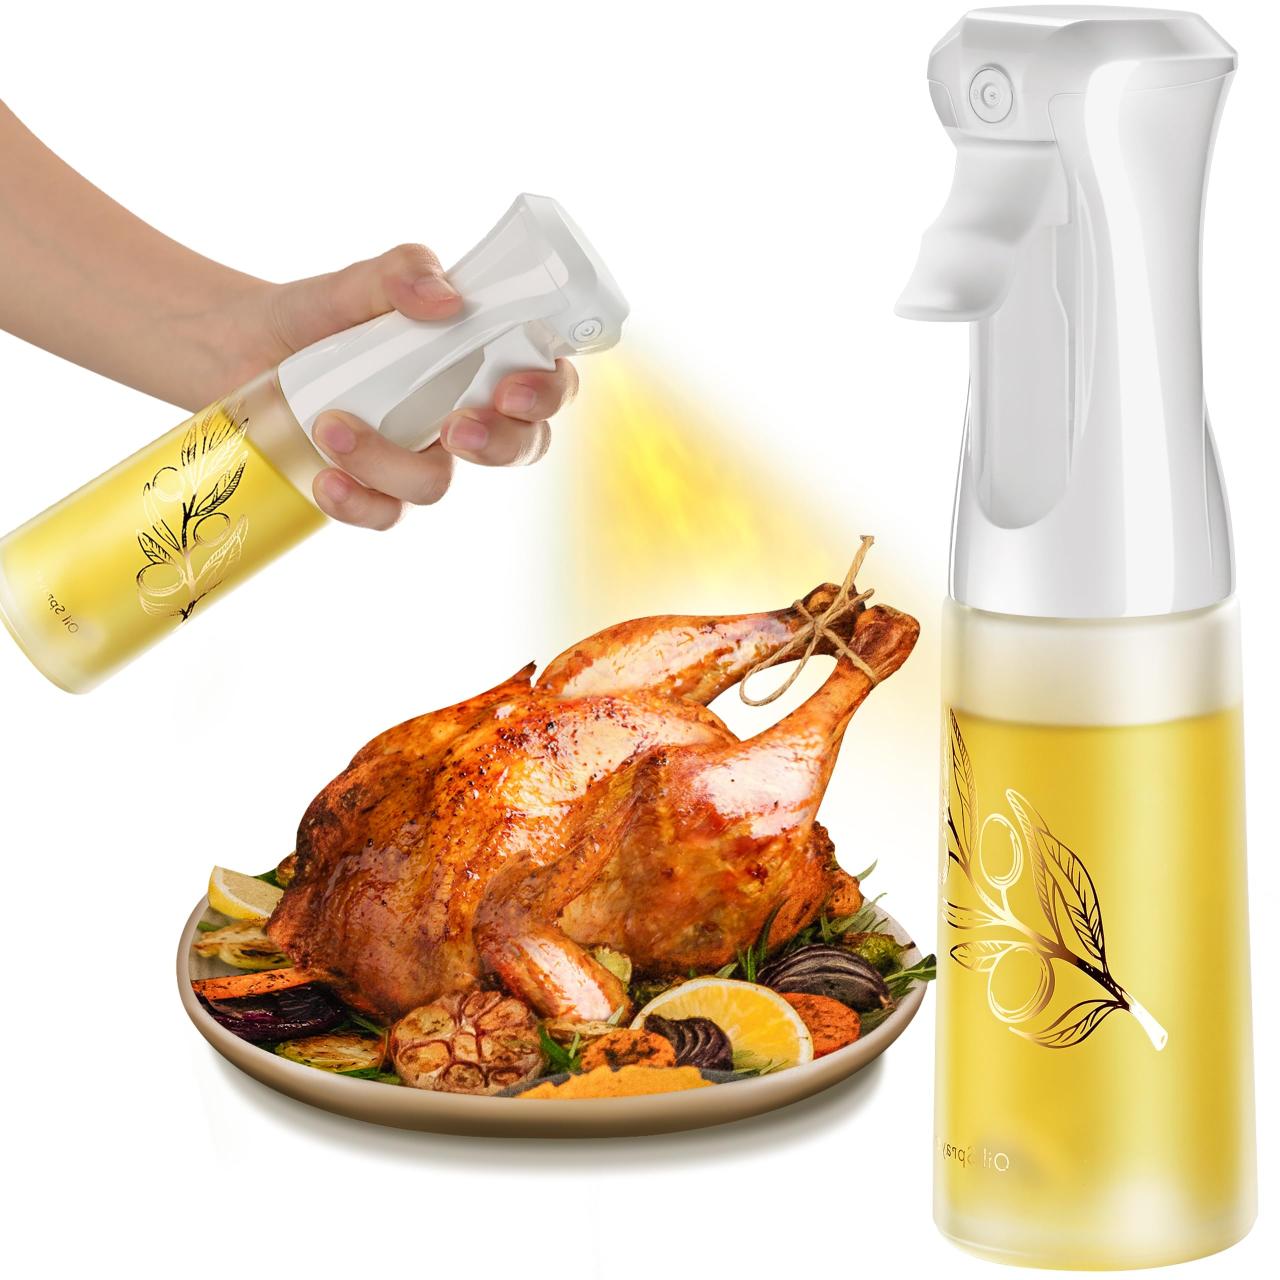 Oil Sprayer for Cooking product image